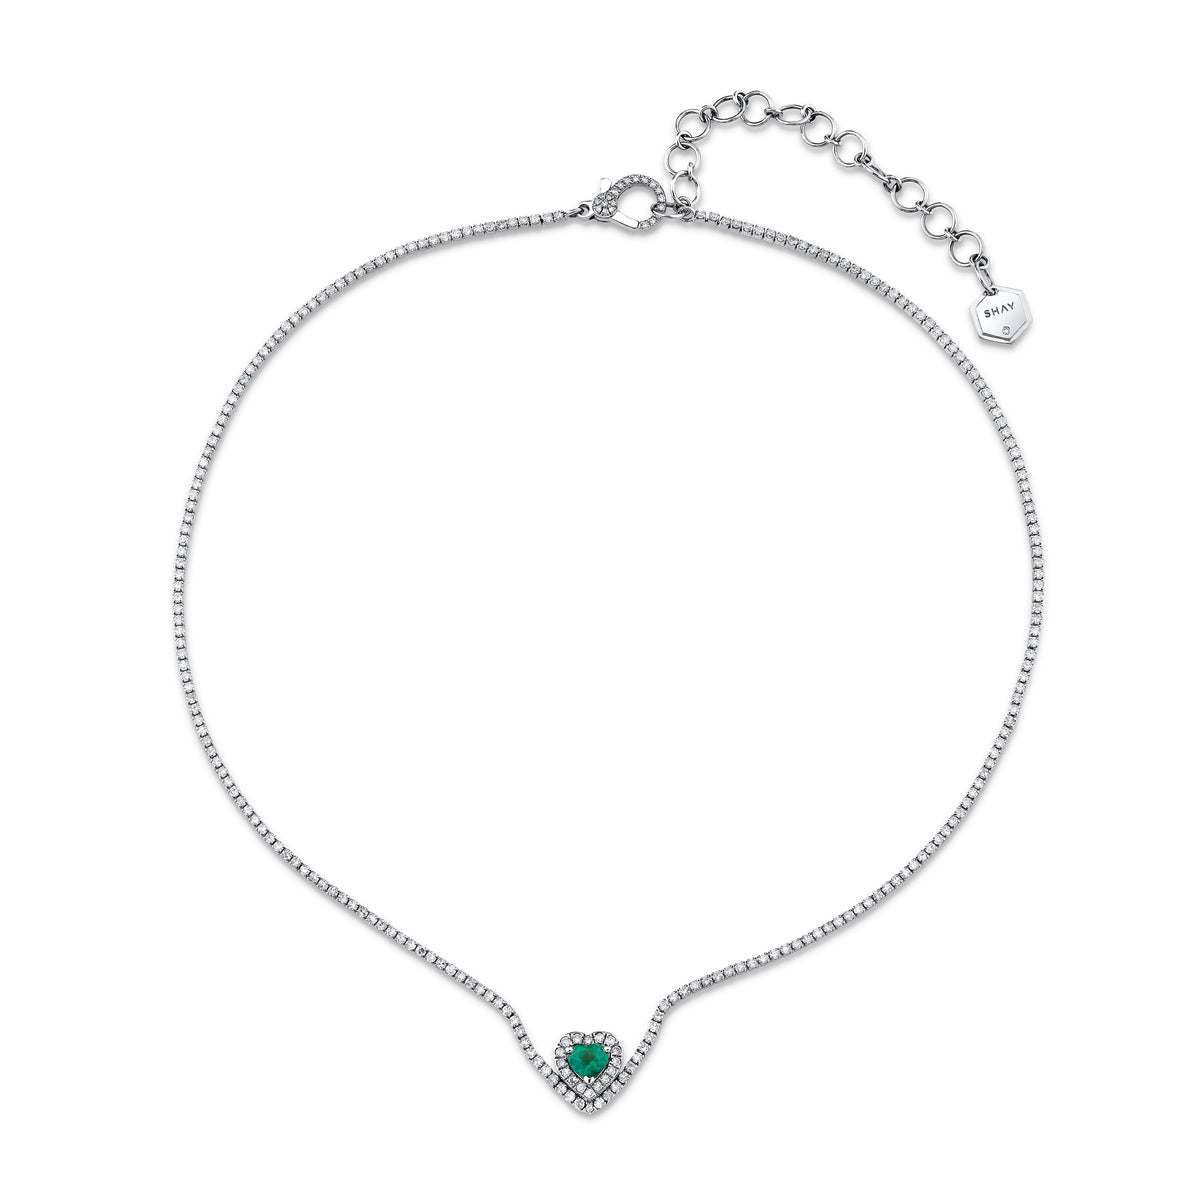 EMERALD & DIAMOND FLOATING HEART PAVE THREAD NECKLACE